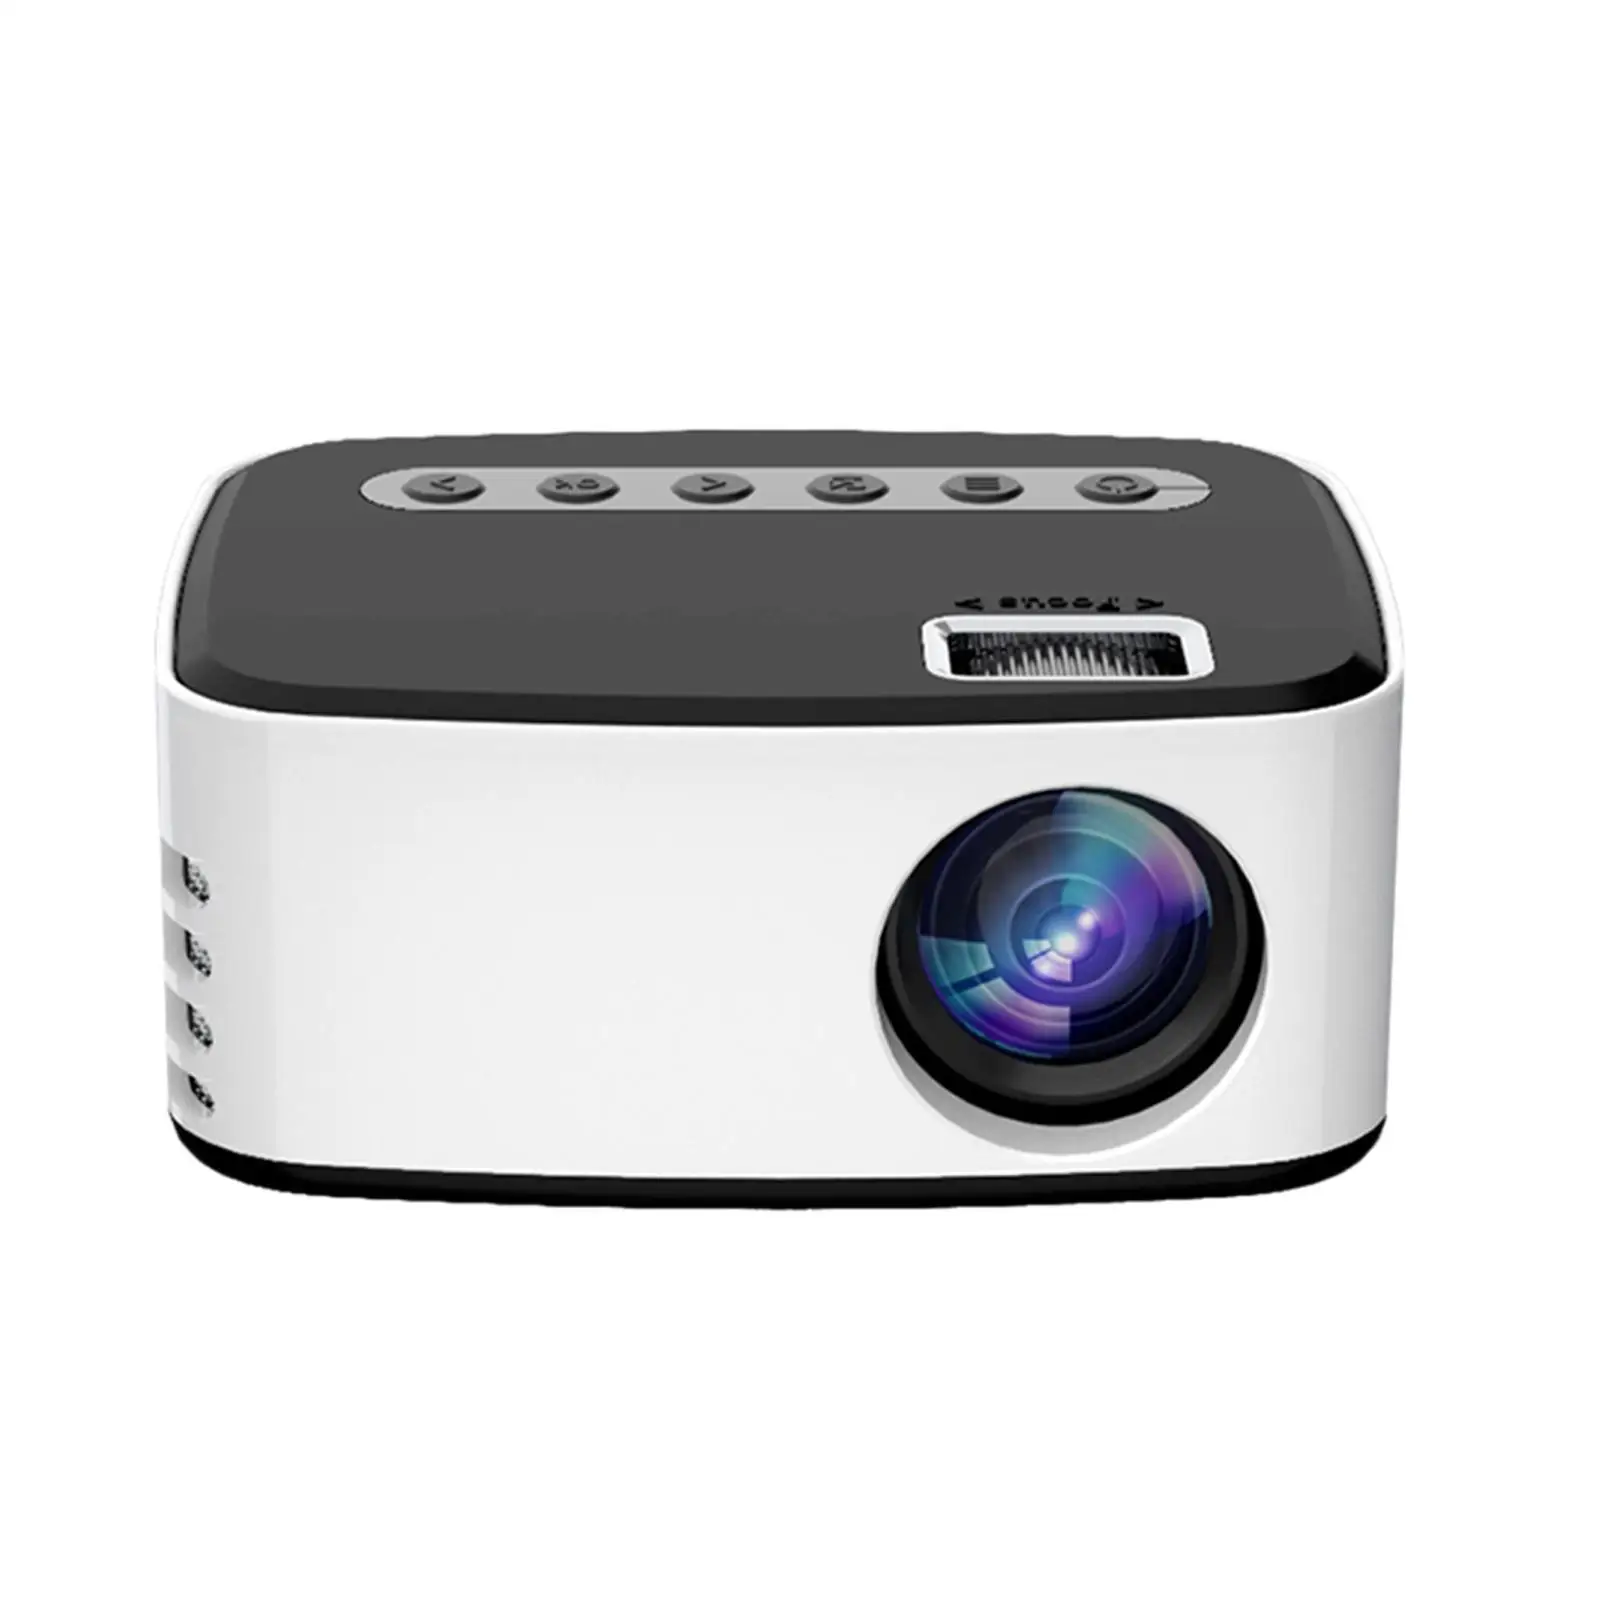 Projector Smart Compatible with Android USB HD Pocket Projector for Home Cinema Inside Outside Smartphone Office Theater Bedroom